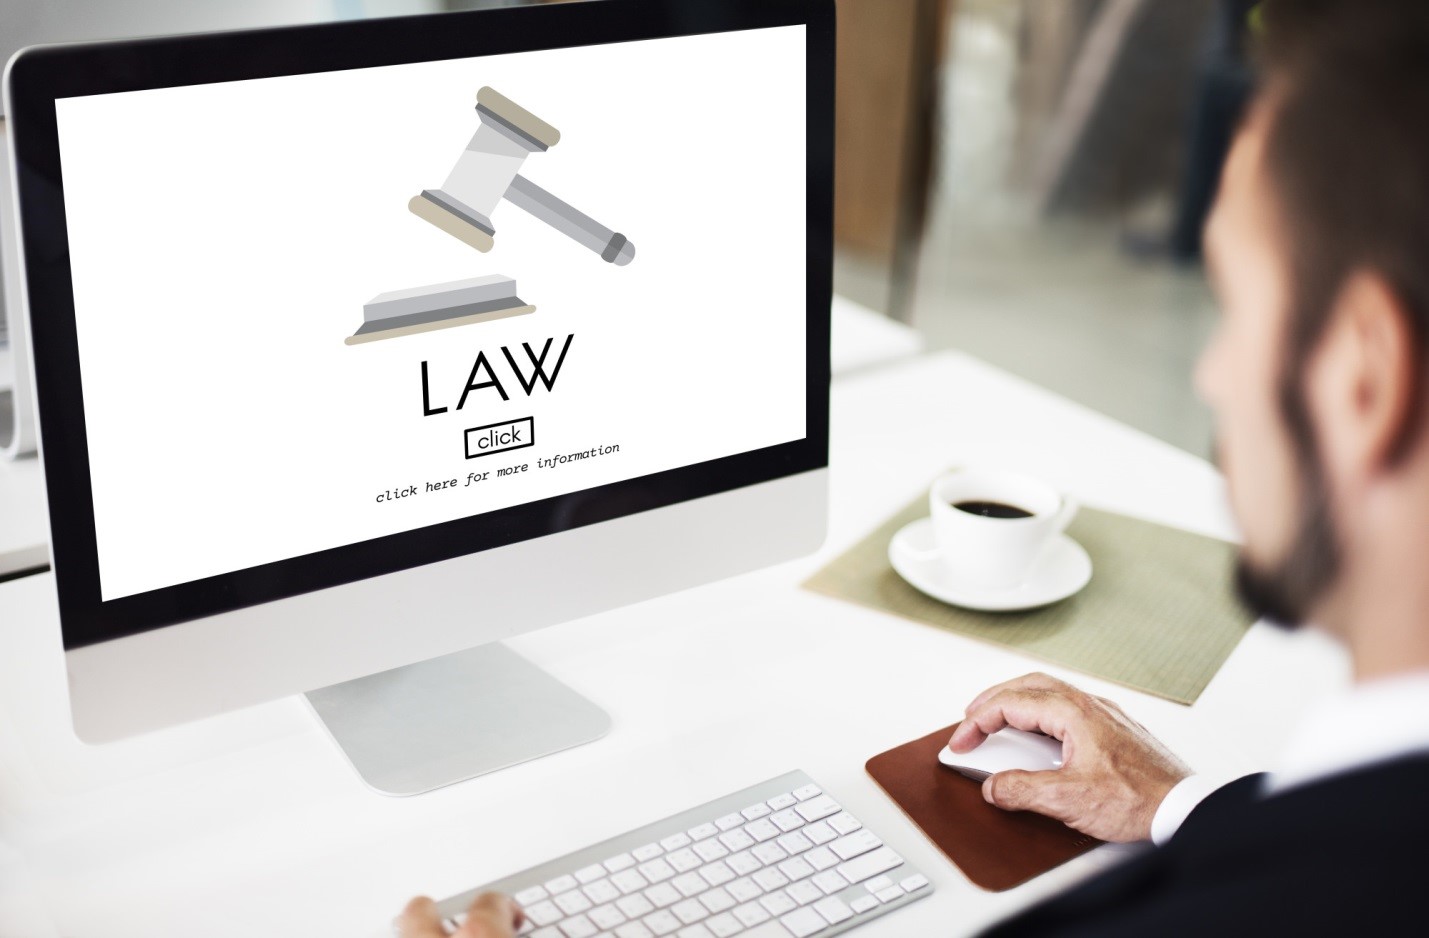 Law firm online marketing tips